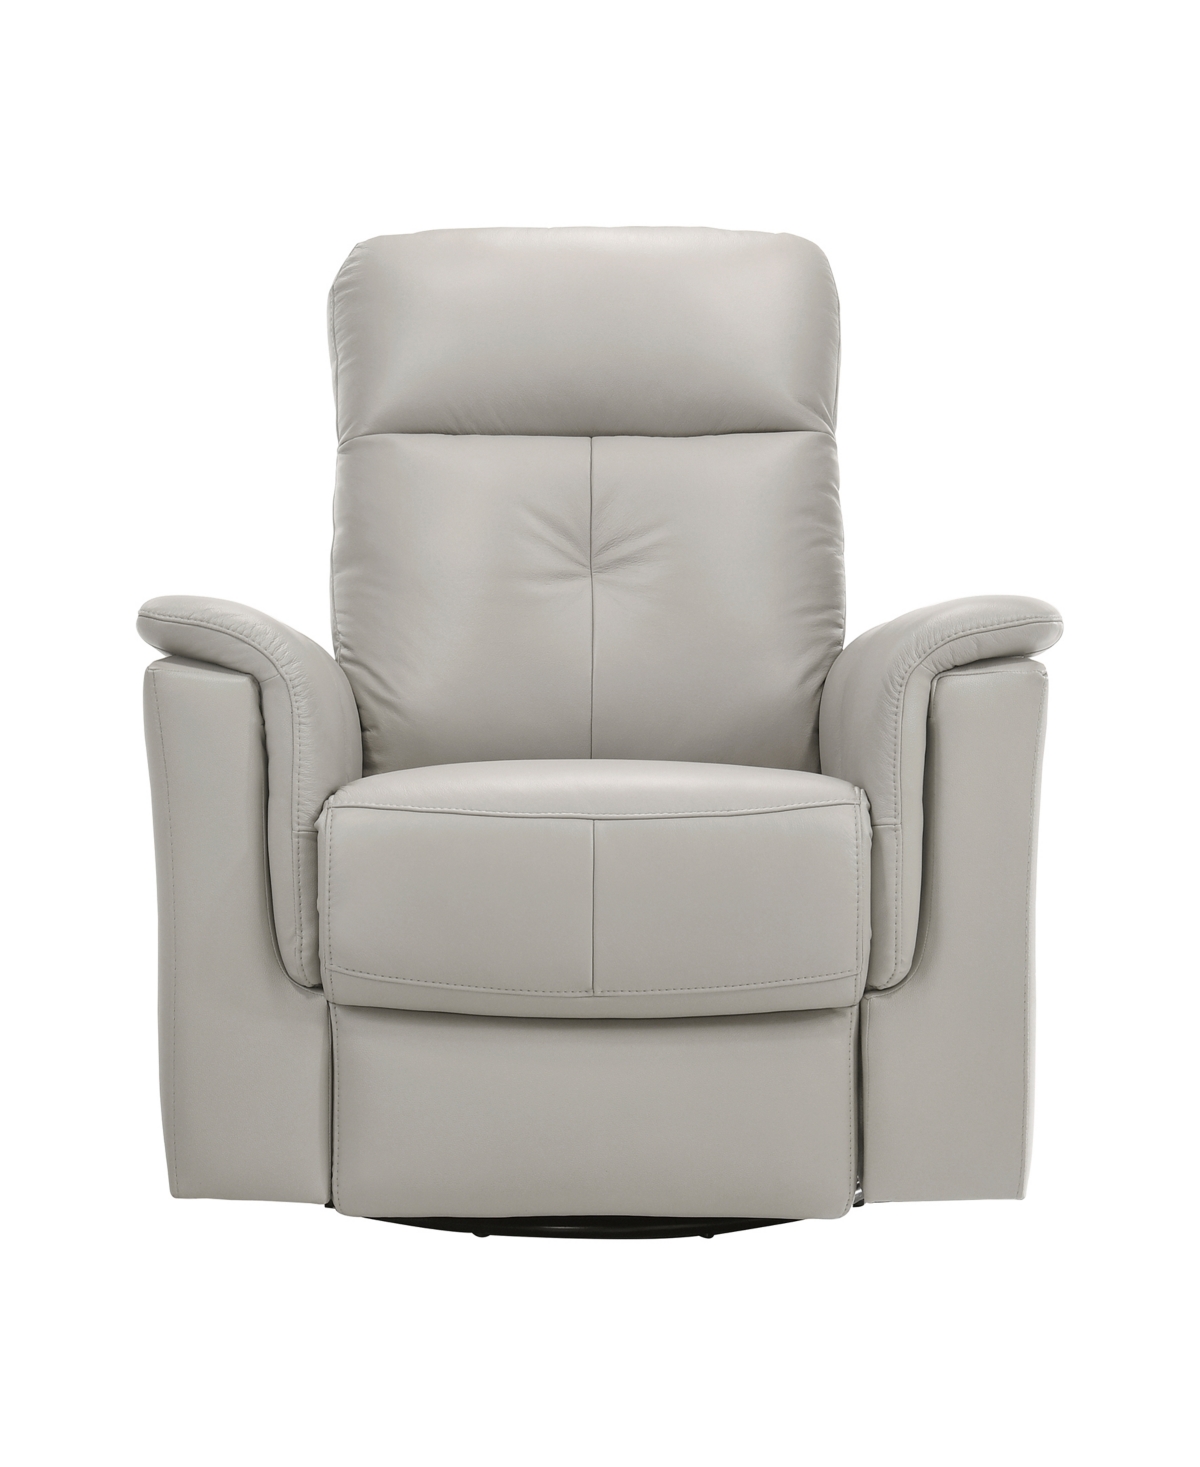 Homelegance Emillia 36" Leather Swivel Glider Reclining Chair In Silver